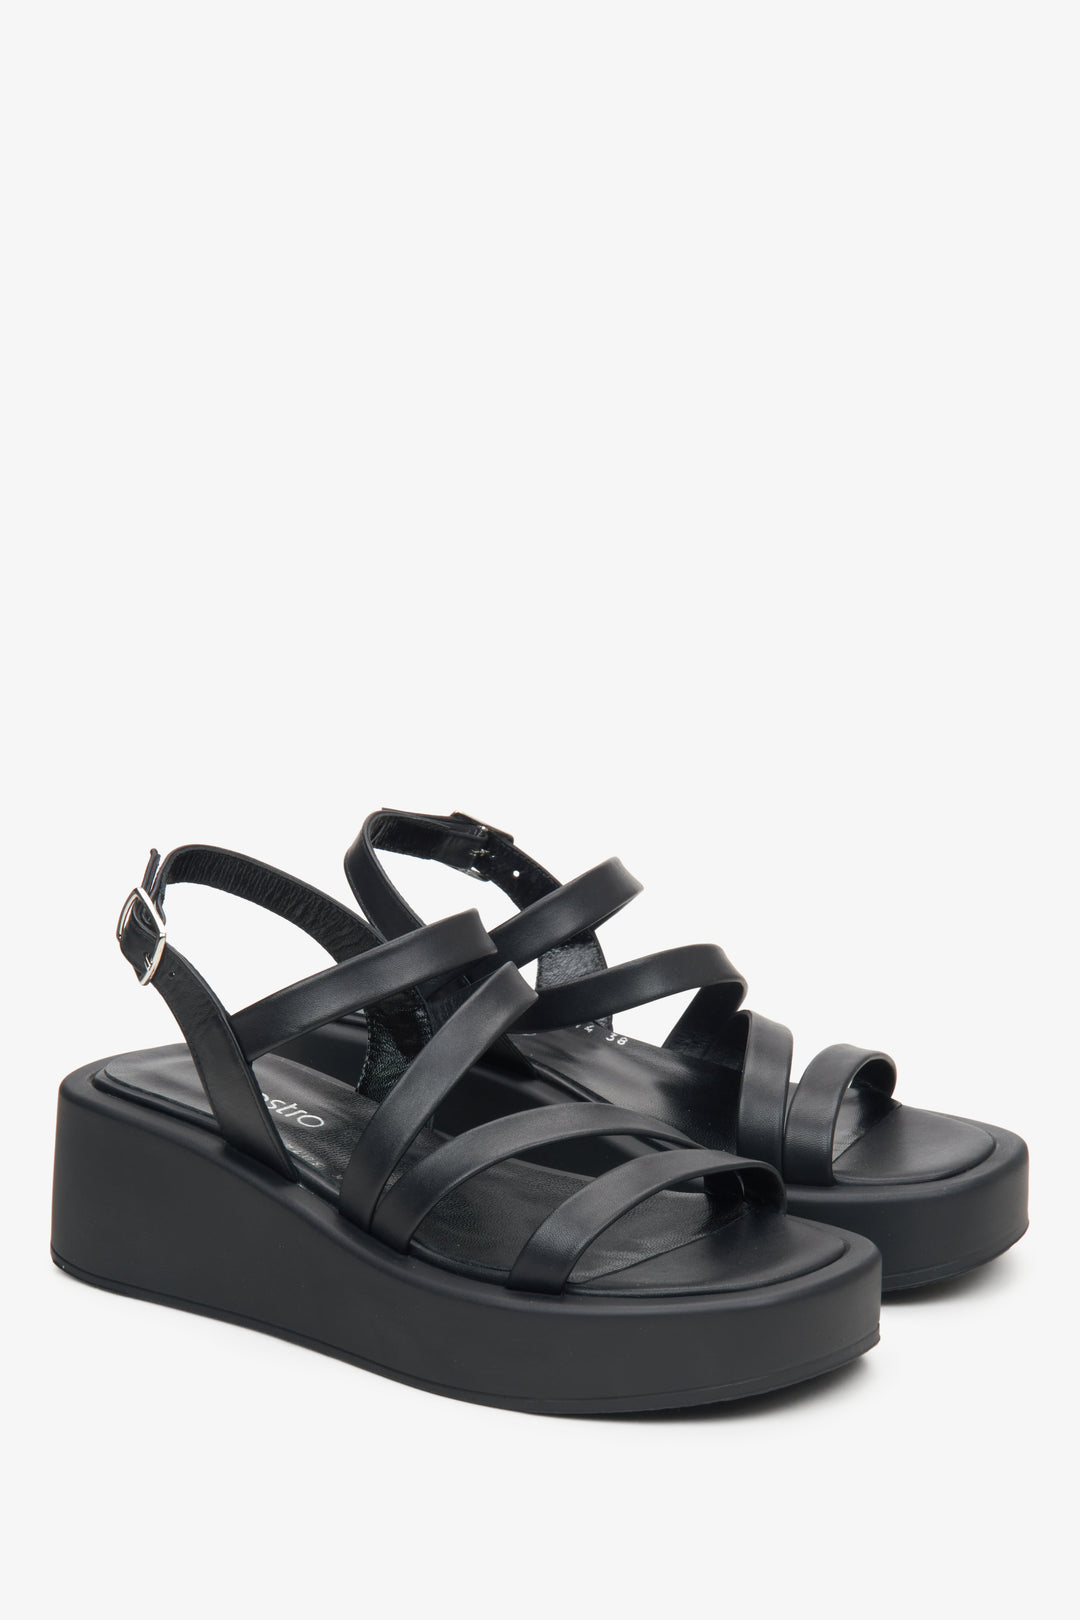 Women's leather wedge sandals by Estro in black colour.